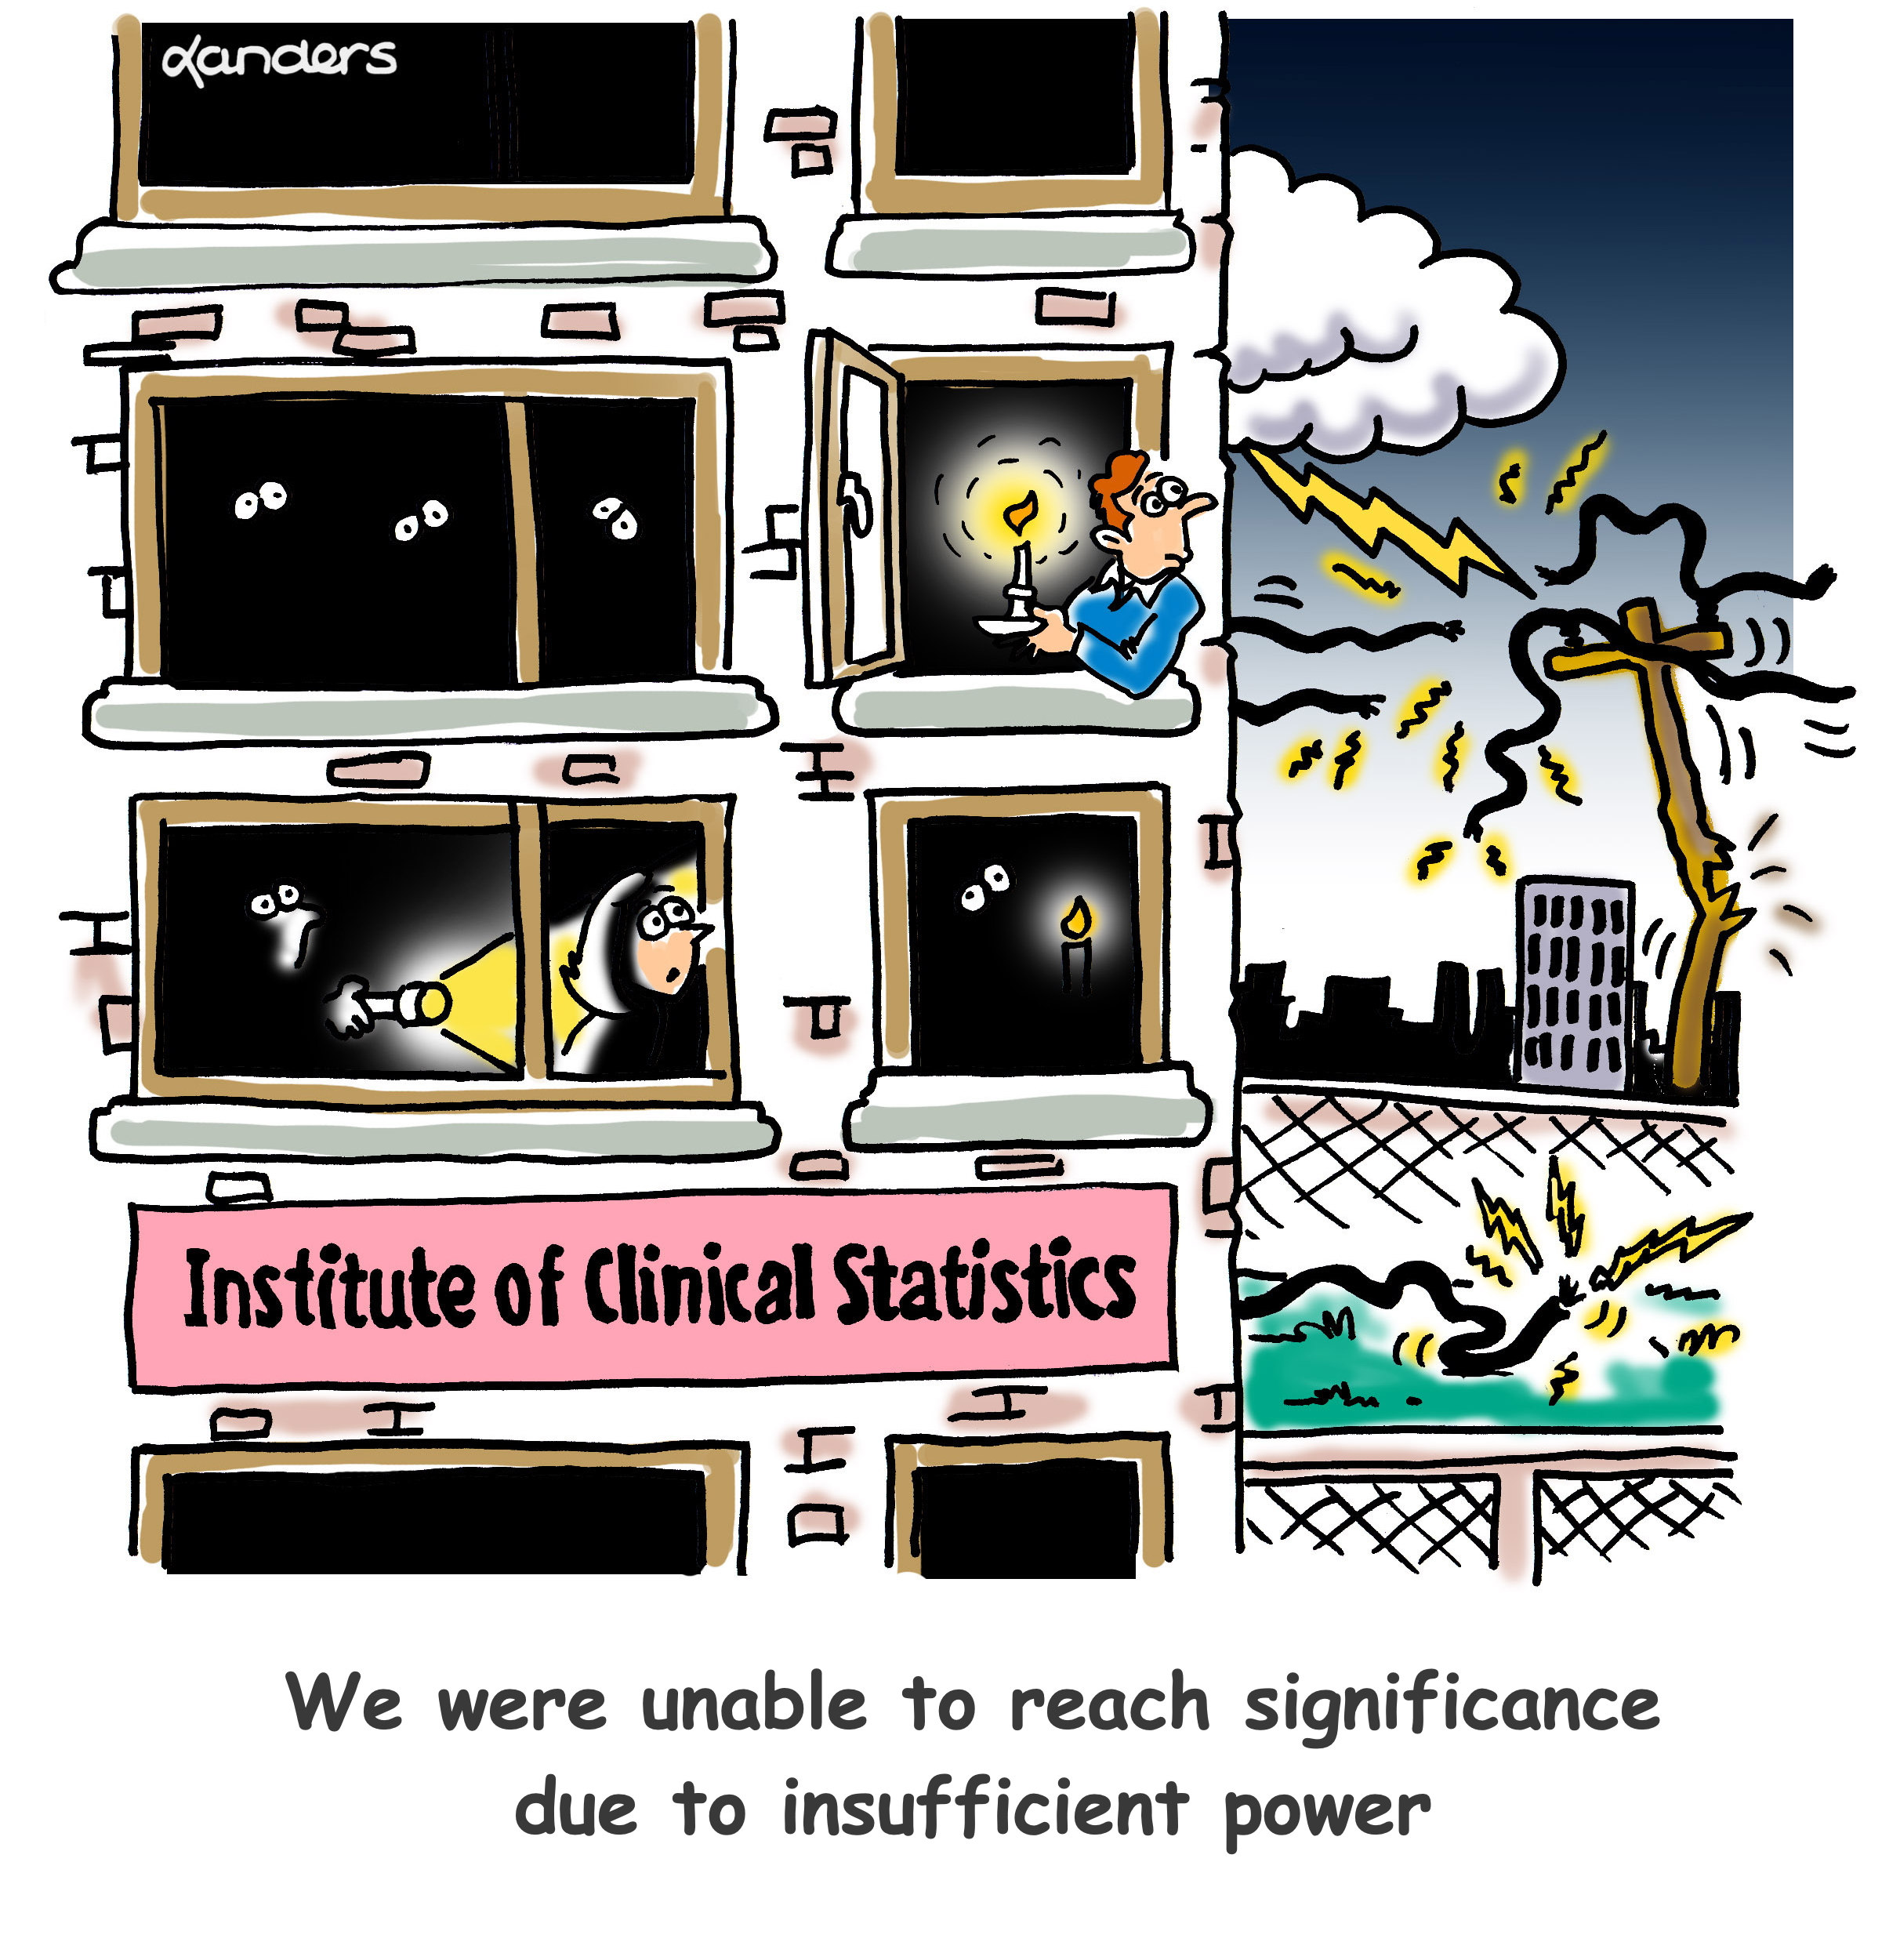 cartoon showing a power outage at a statistics institute